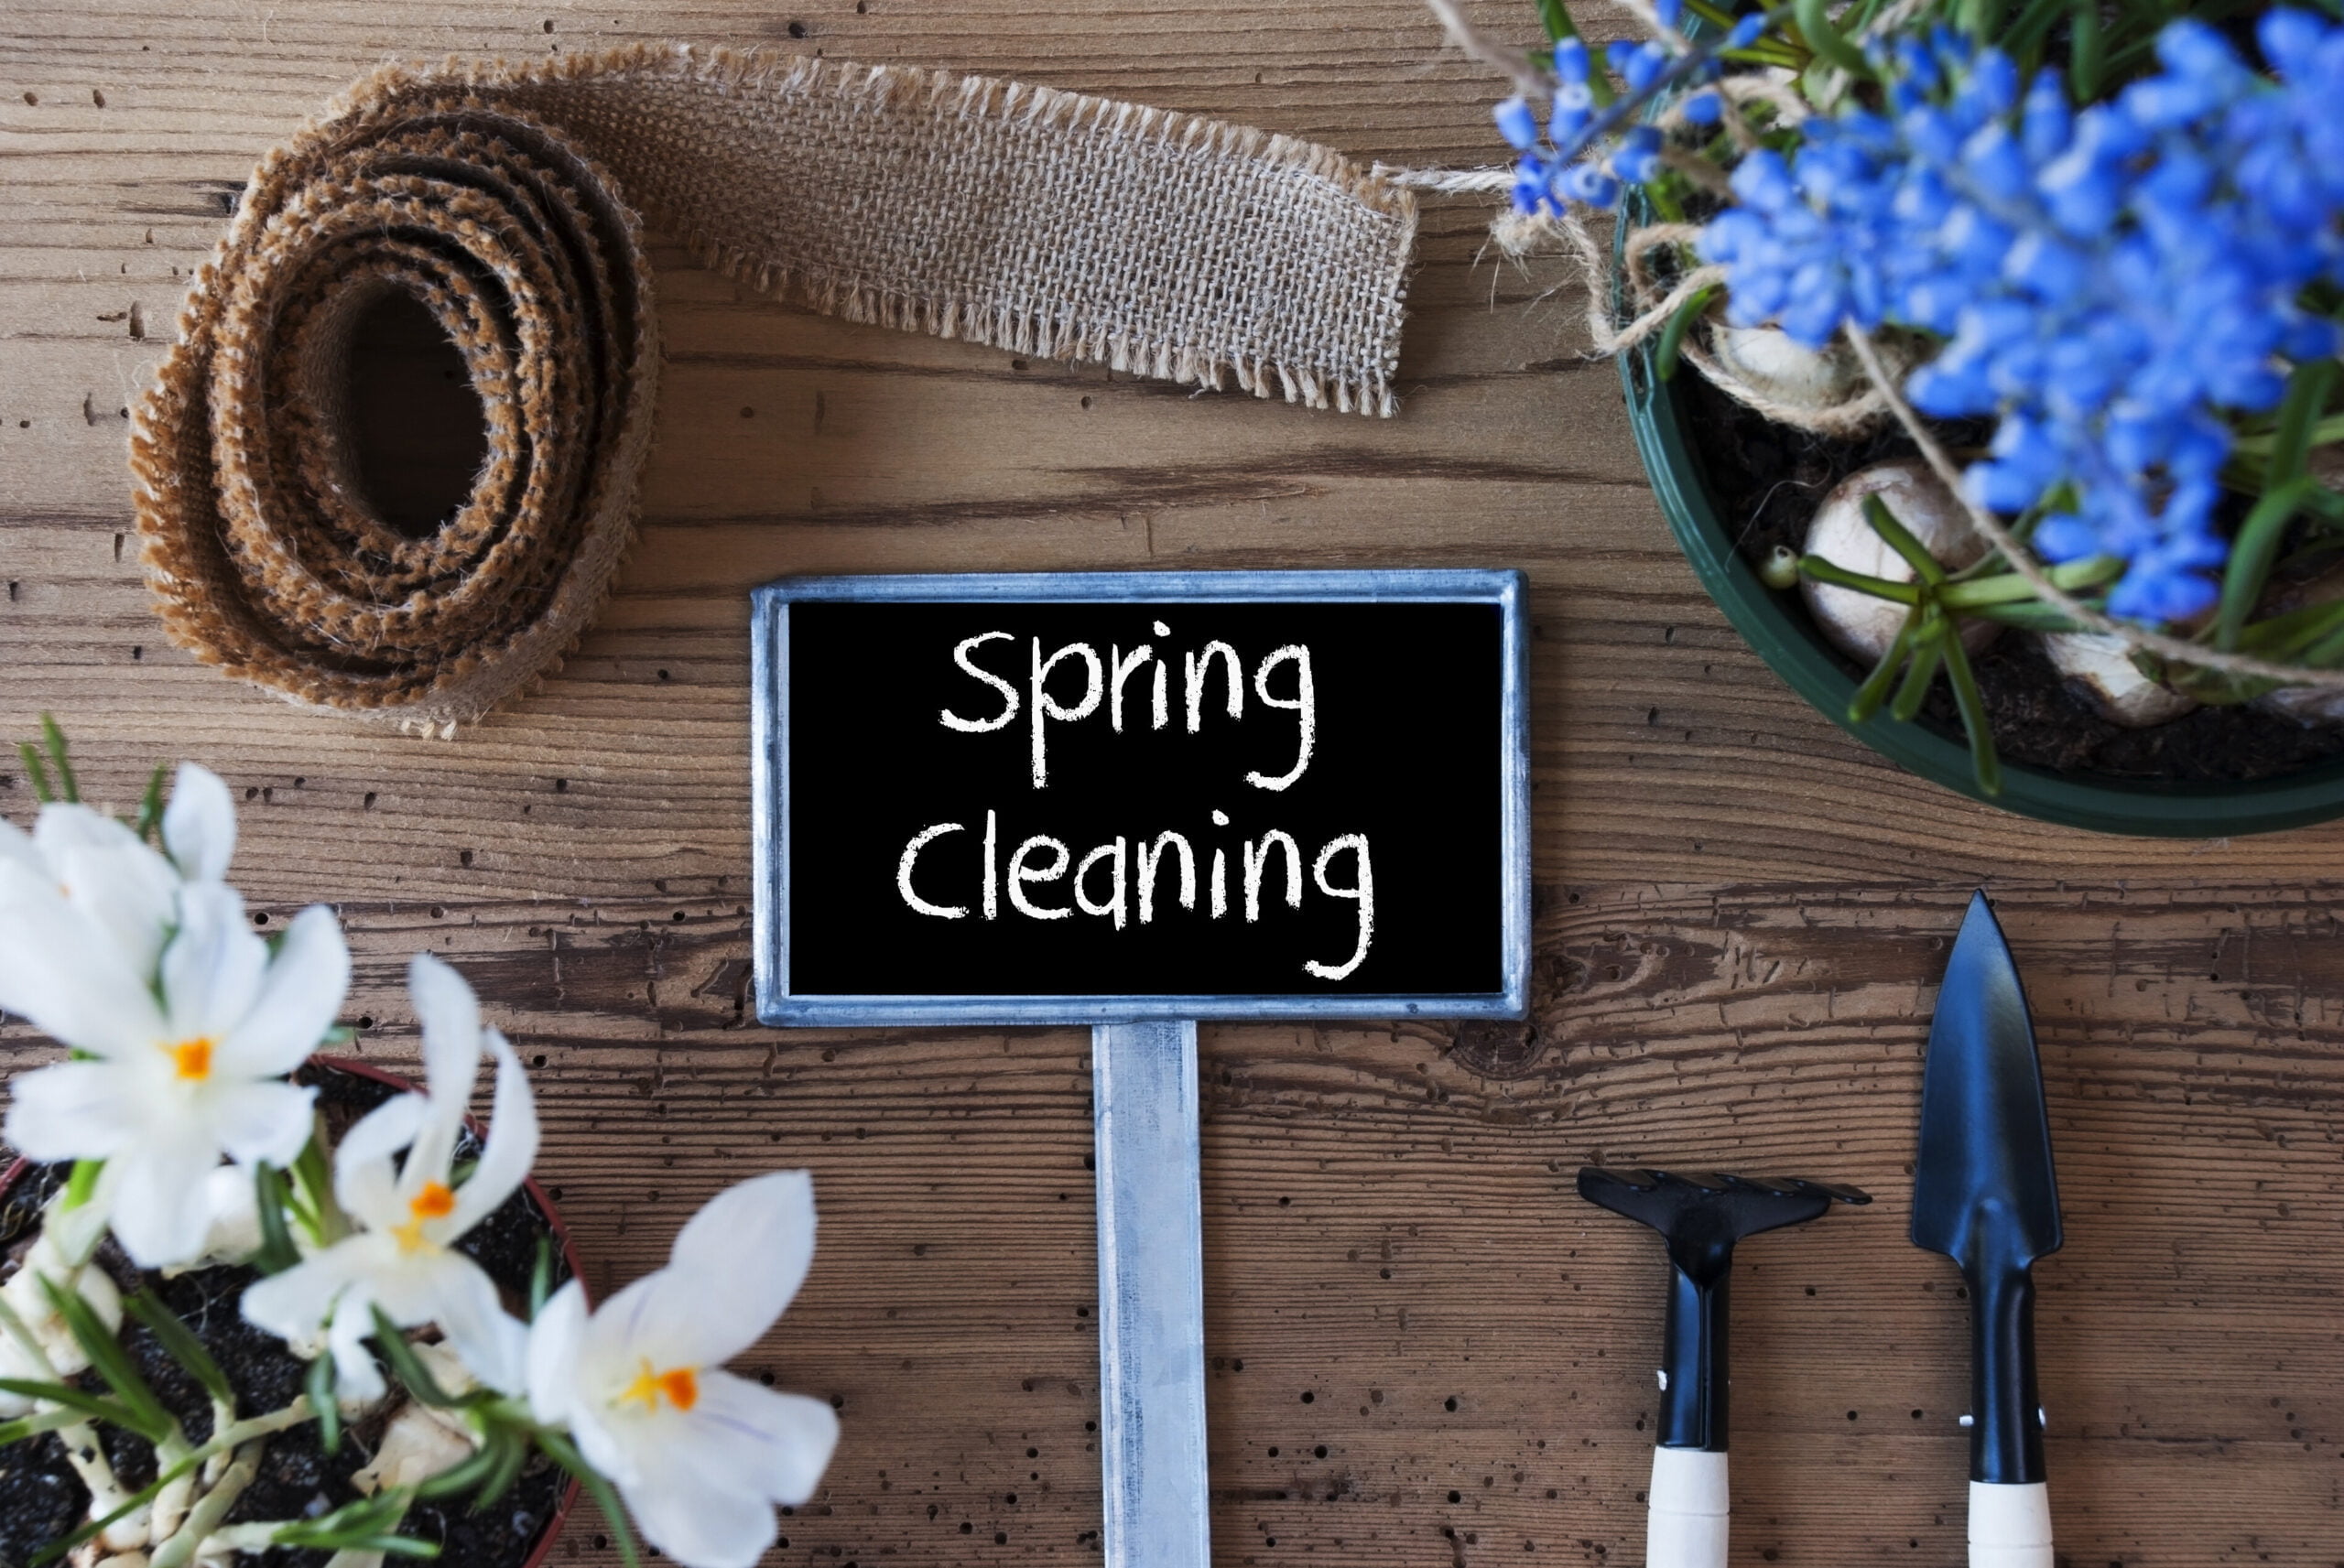 Spring Clean your job search with these simple tips!